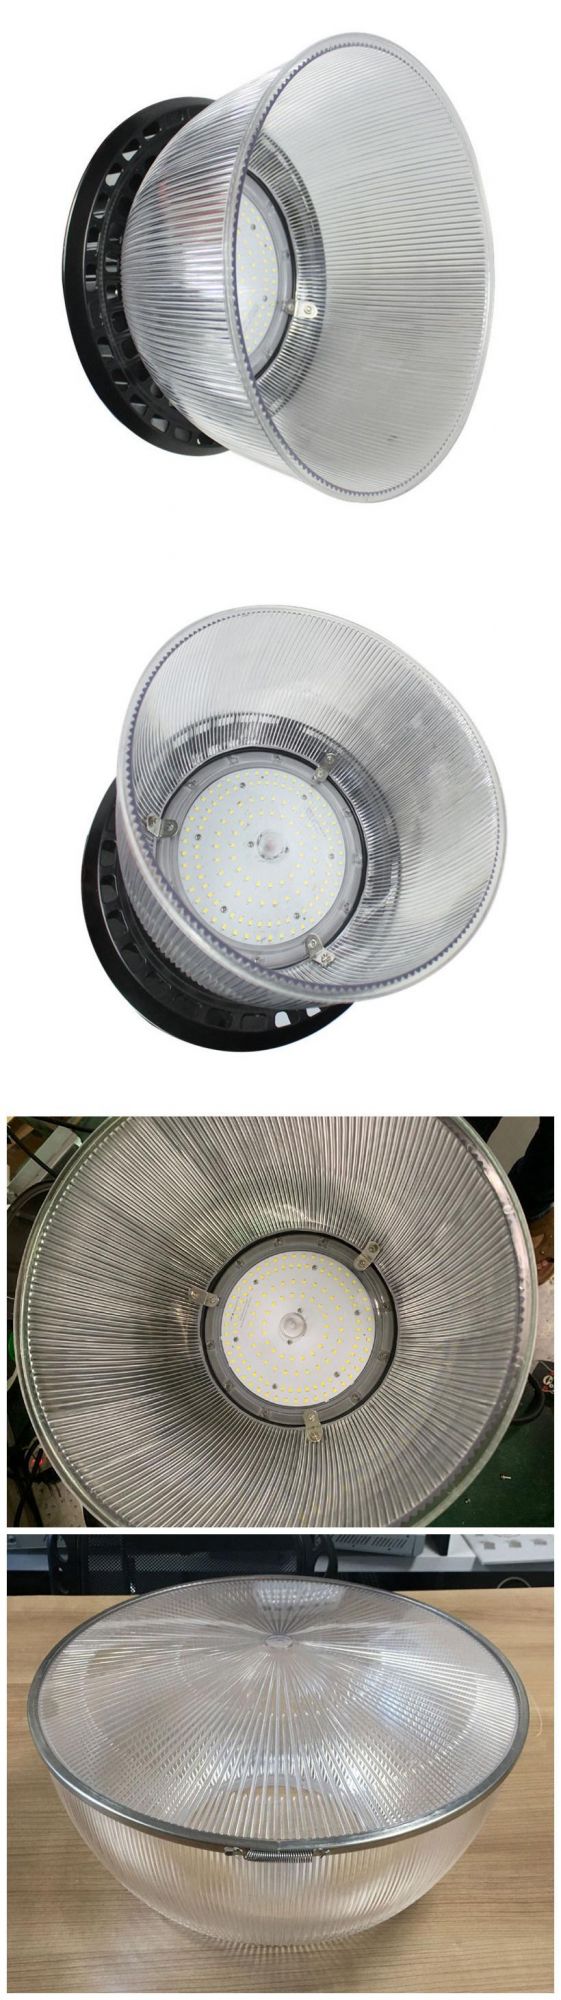 New 100W Industrial UFO LED High Bay Light for Warehouse